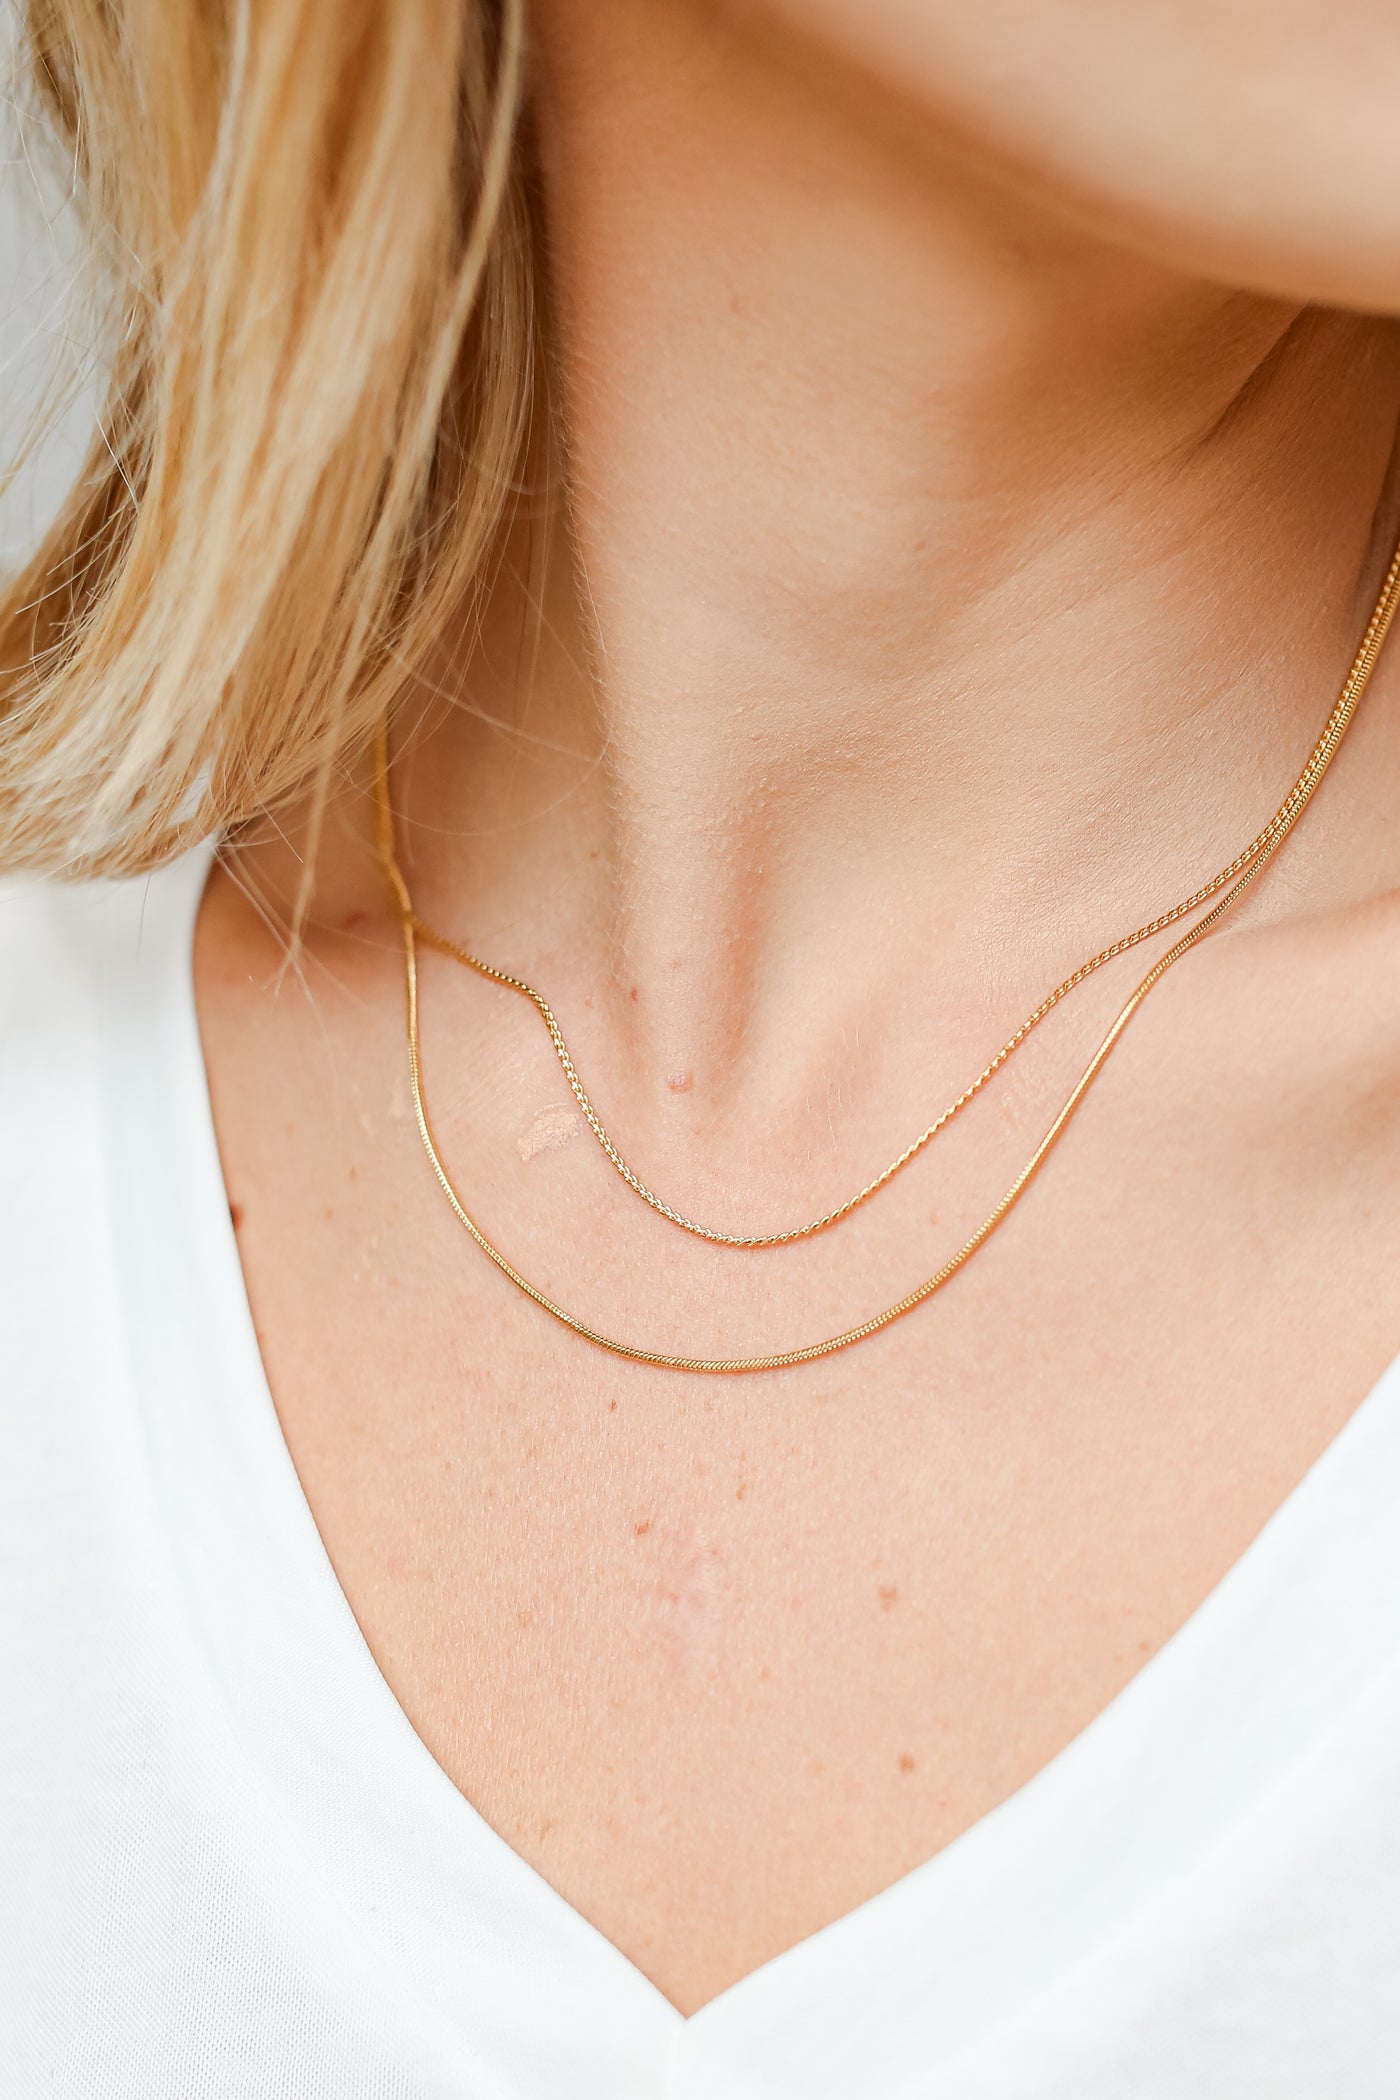 dainty gold layered necklaces